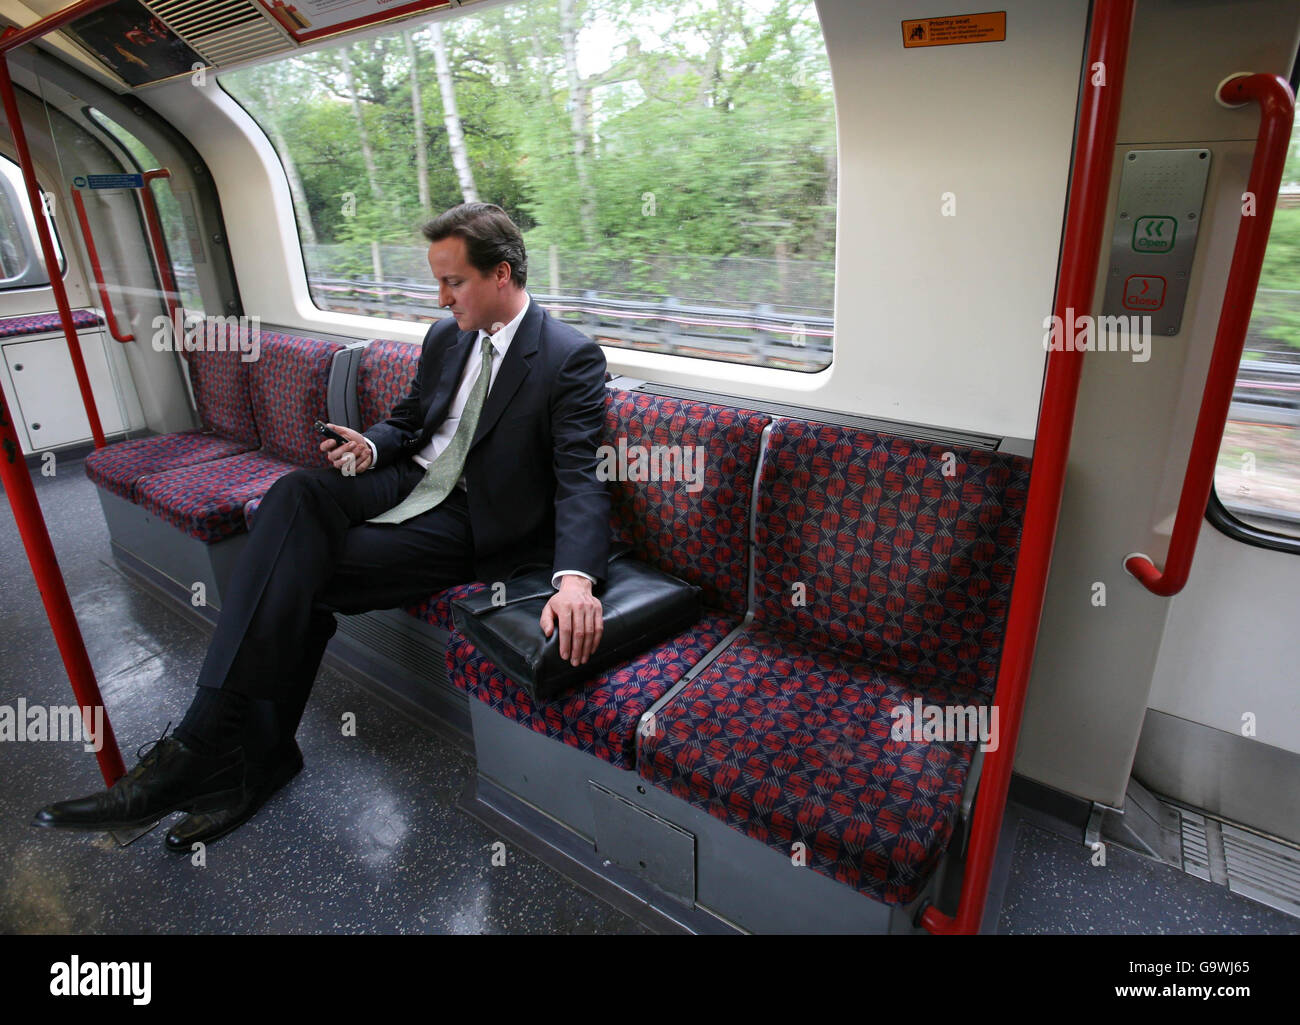 Conservative Party leader David Cameron takes the tube back to central London from Epping after visiting community enterprise initiative 'The Box' in Epping, Essex, where he discussed the importance of young people playing a full role in society. Stock Photo